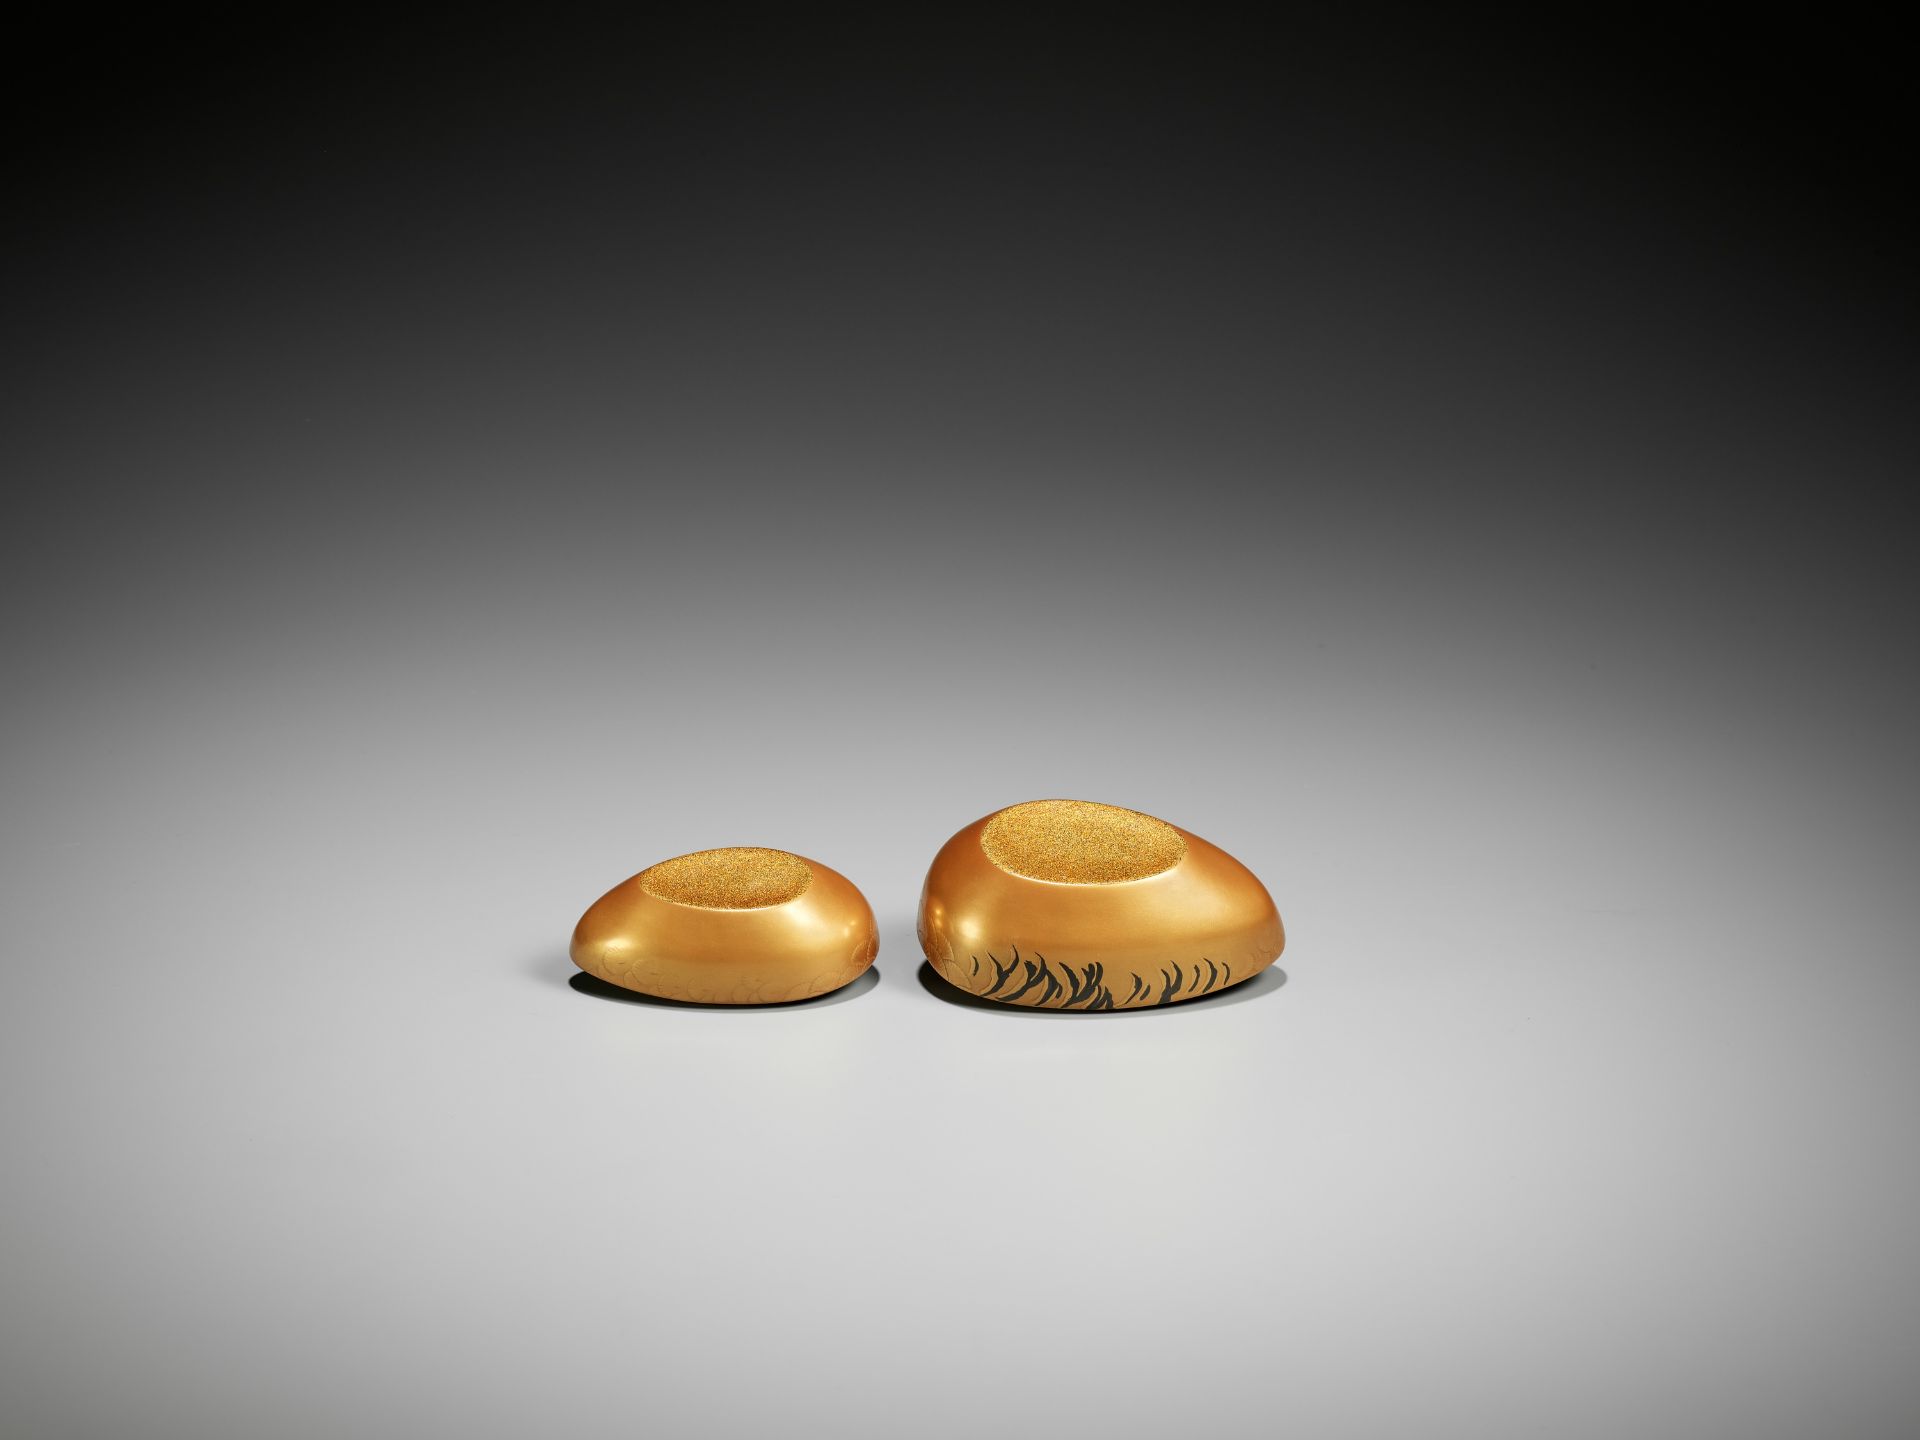 A PAIR OF GOLD LACQUER DUCK-FORM KOGO (INCENSE BOXES) AND COVERS - Image 9 of 9